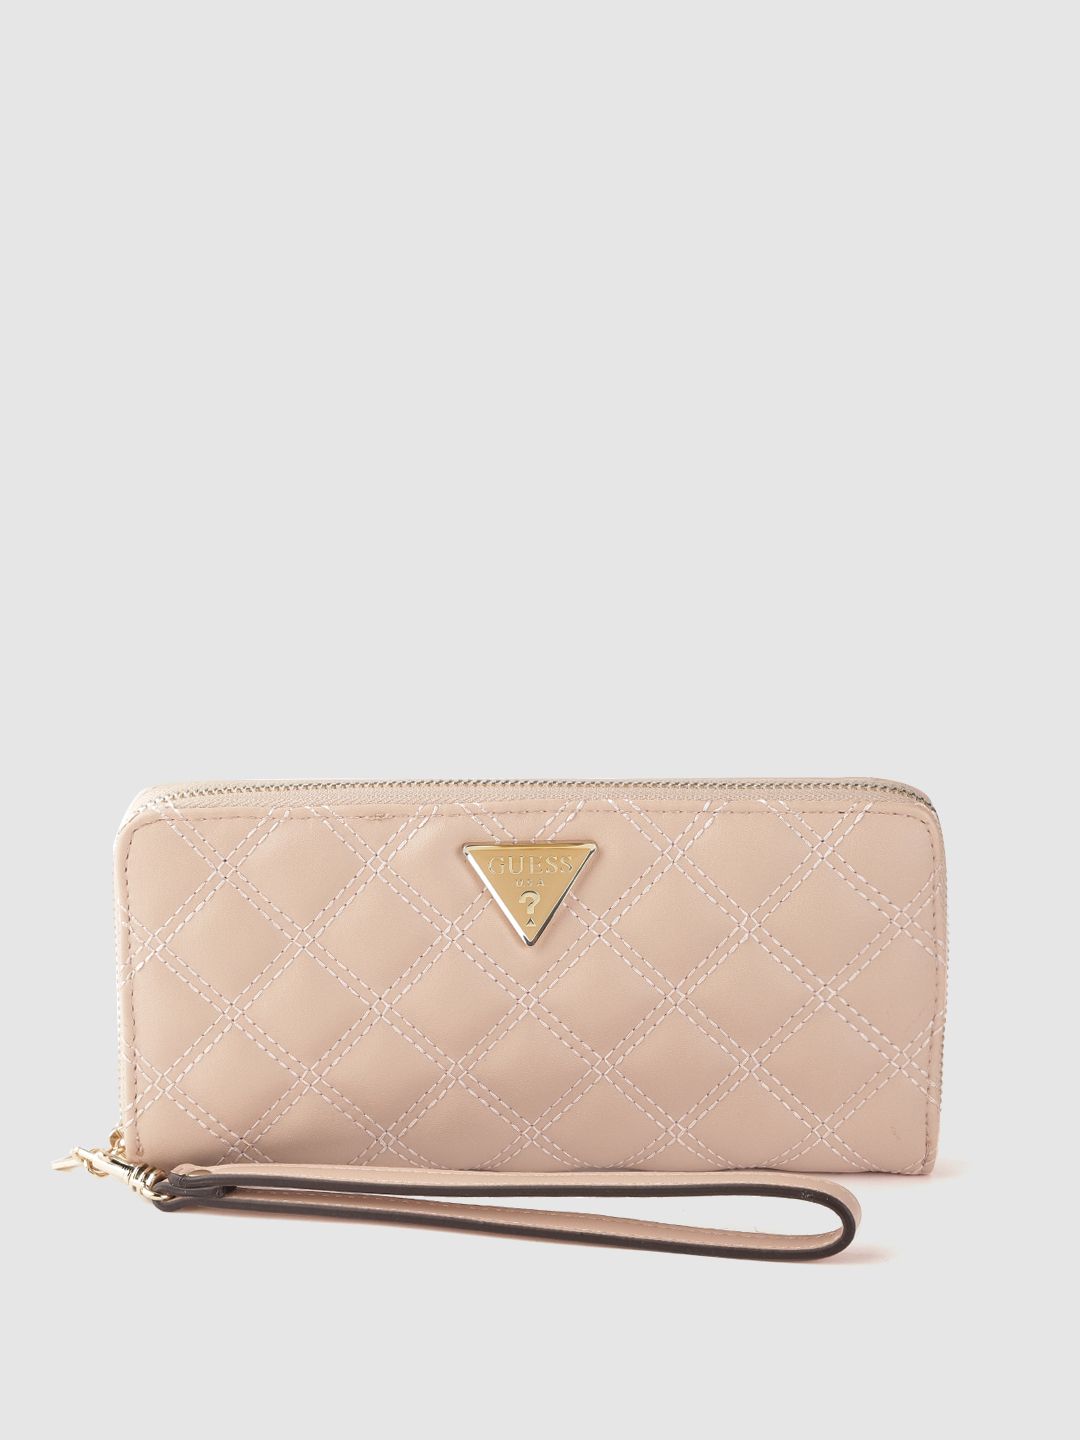 GUESS Women Peach-Coloured Quilted Zip Around Wallet with Wrist Loop Price in India